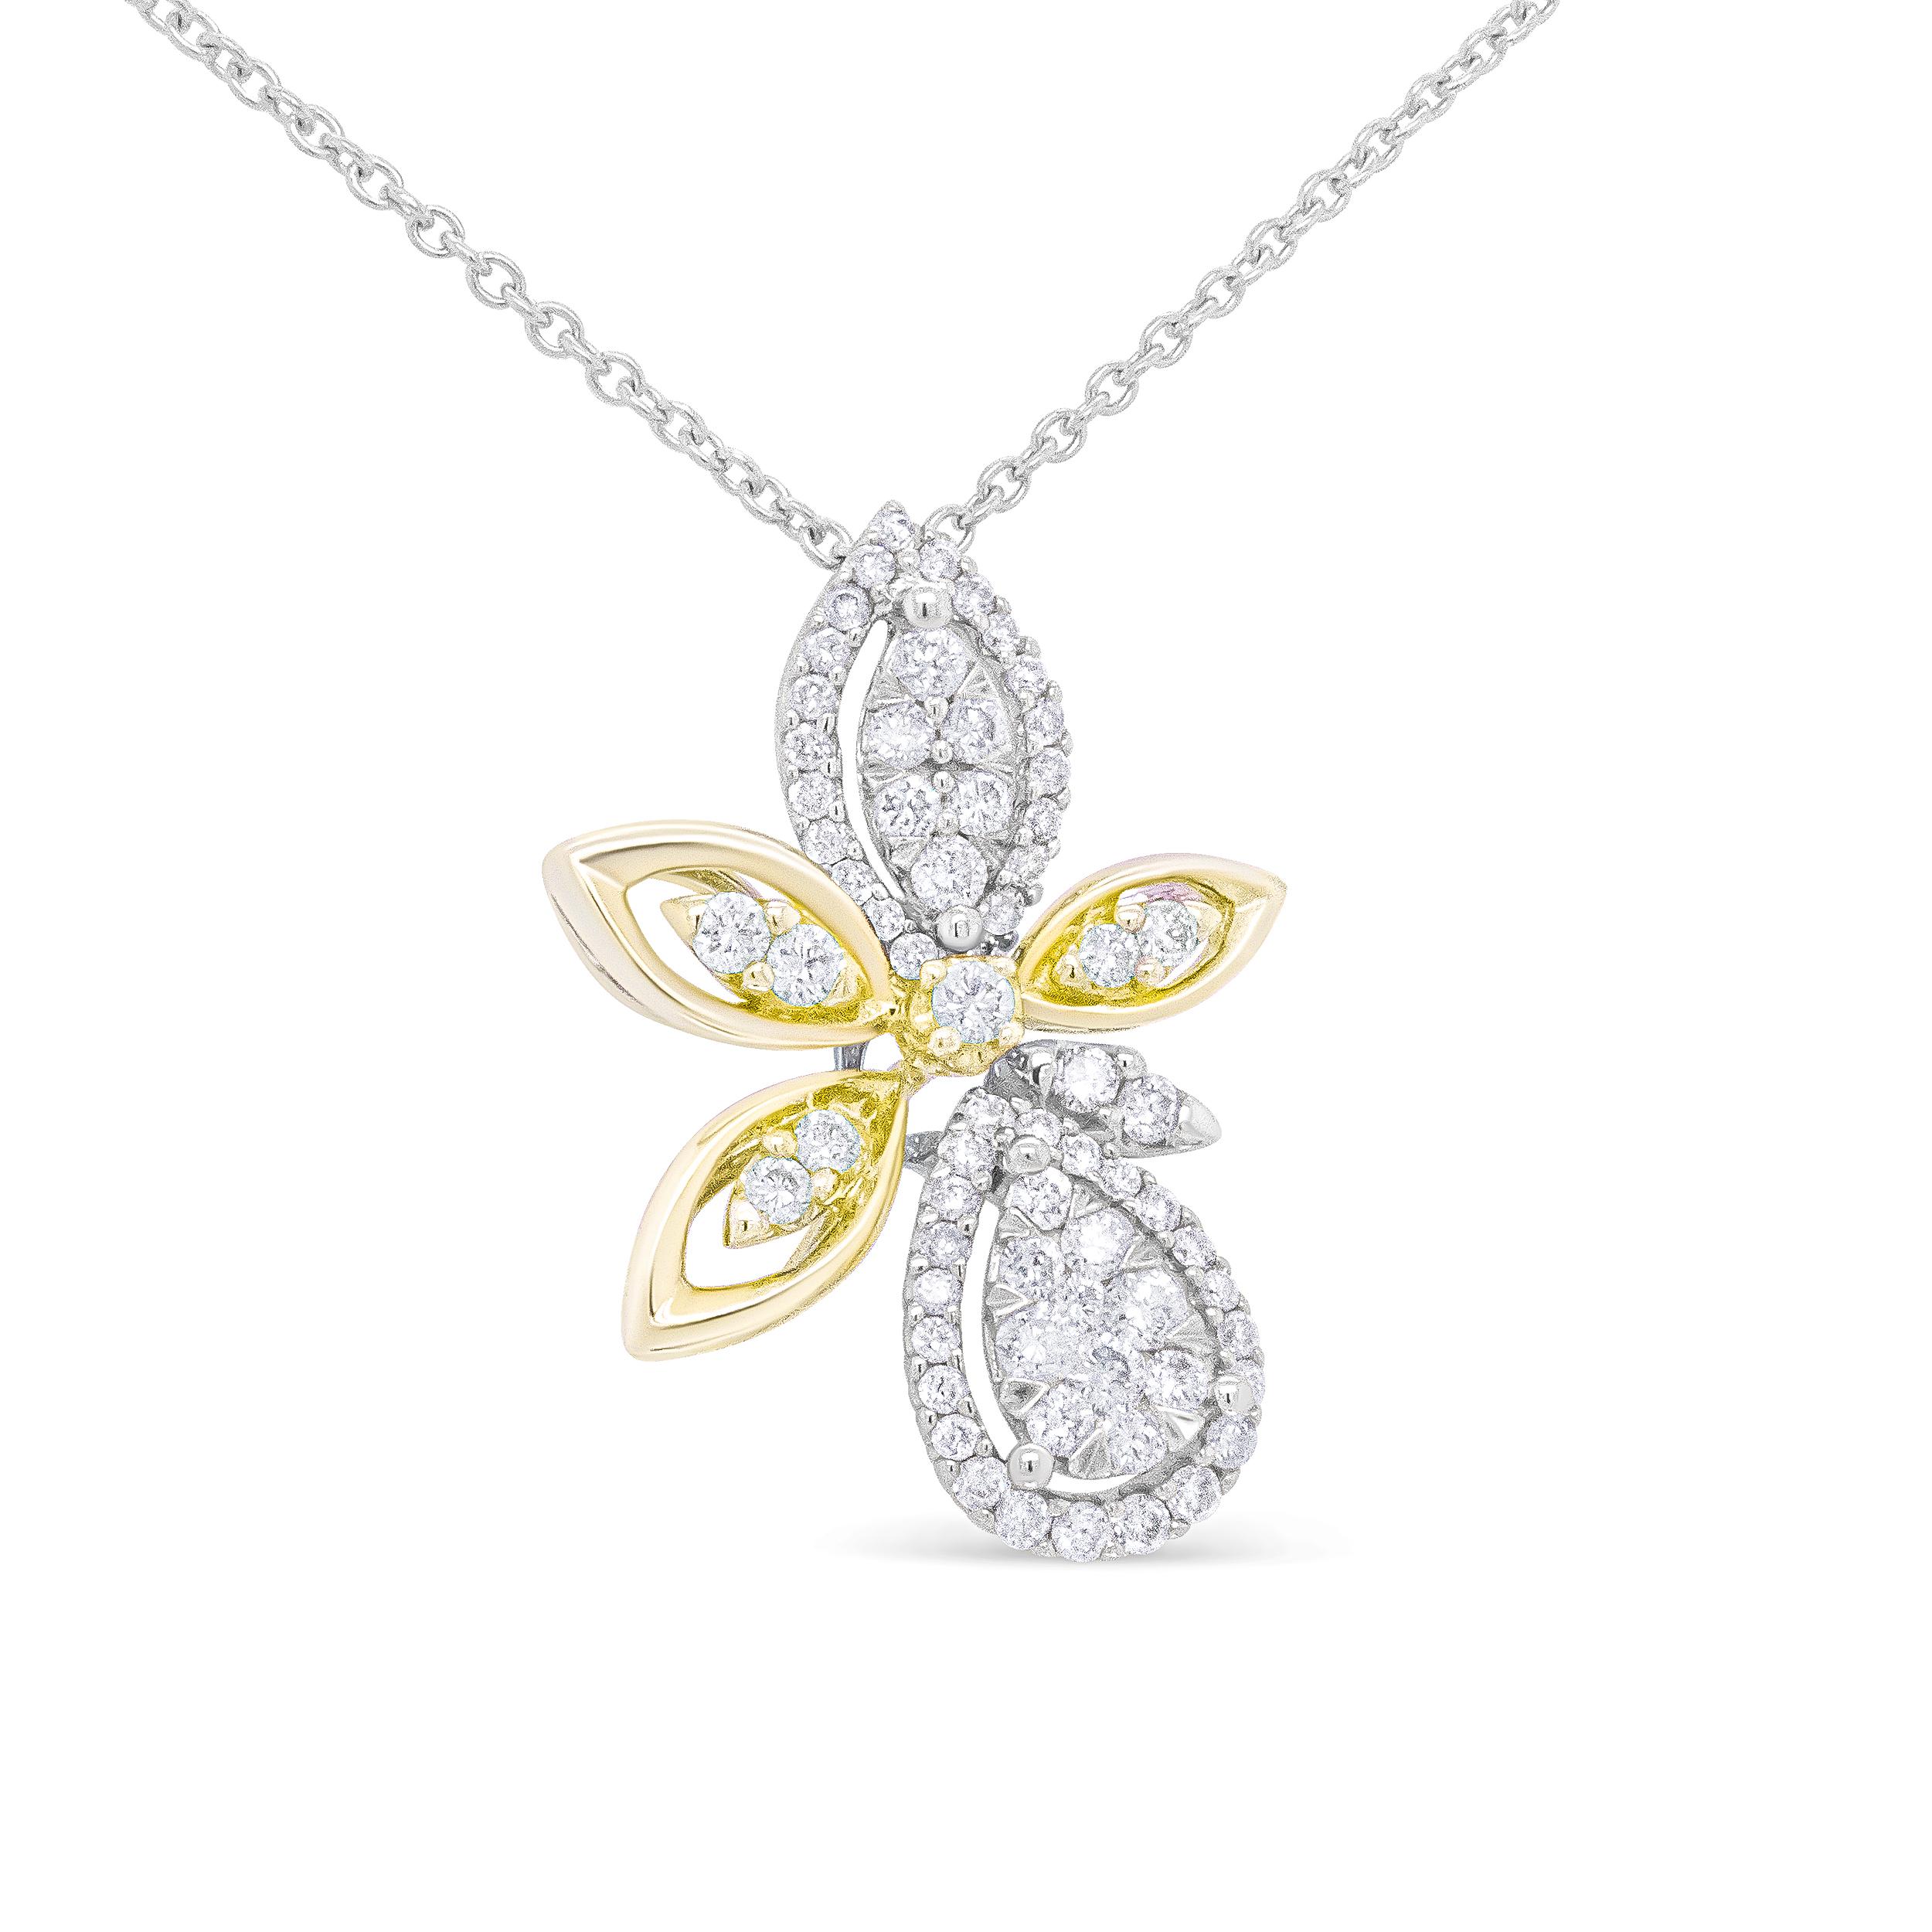 Contemporary 14K White & Yellow Gold 5/8 Carat Diamond Marquise Floral Style Pendant Necklace For Sale